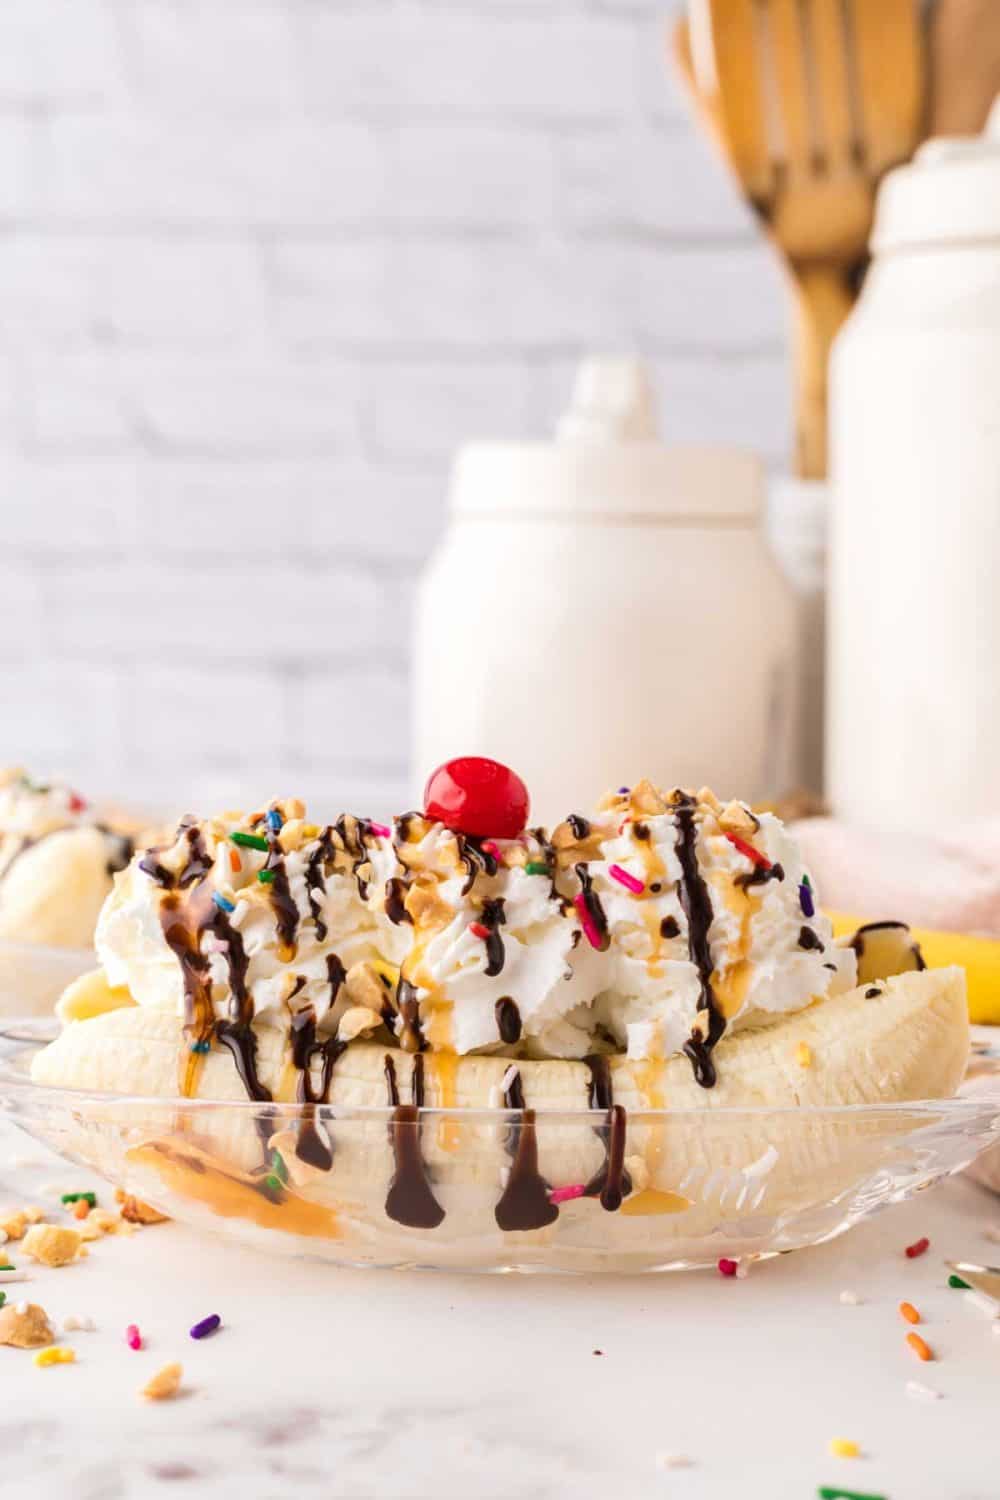 oval dish with classic banana split recipe with vanilla ice cream chocolate sprinkles and a cherry on top.